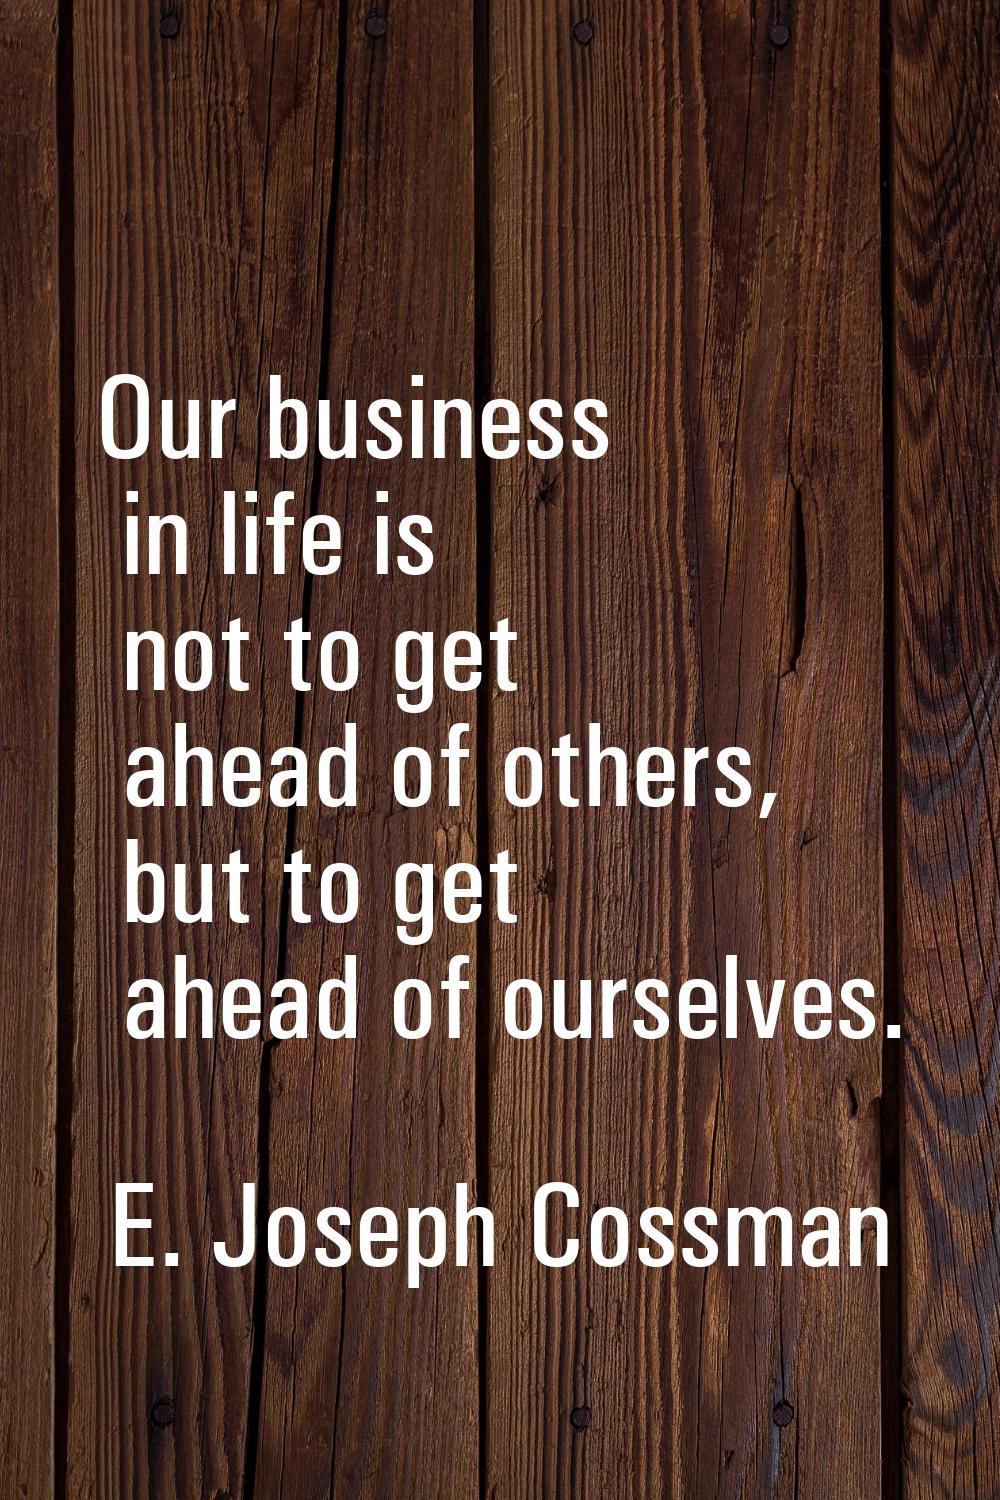 Our business in life is not to get ahead of others, but to get ahead of ourselves.